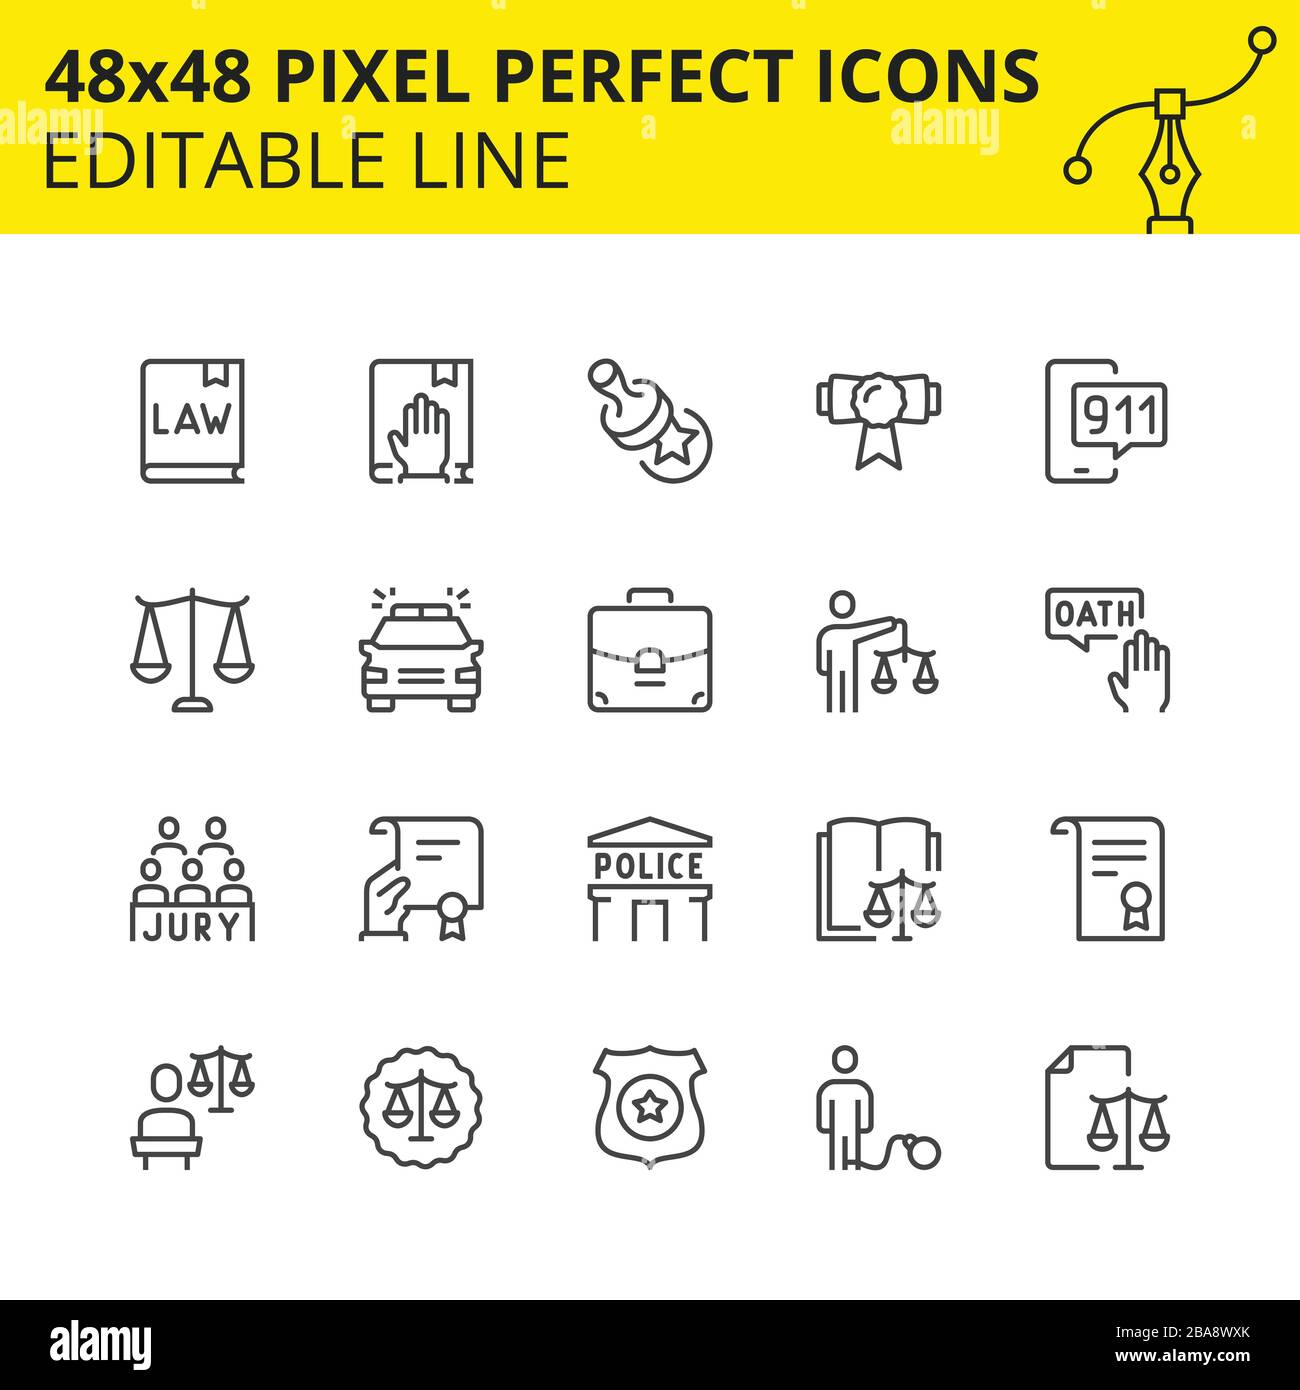 Simple Set Icons Law and Judge. Includes Oath, Jury, Prisoner, Police Badge etc. Pixel Perfect 48x48, Editable Set. Vector. Stock Vector